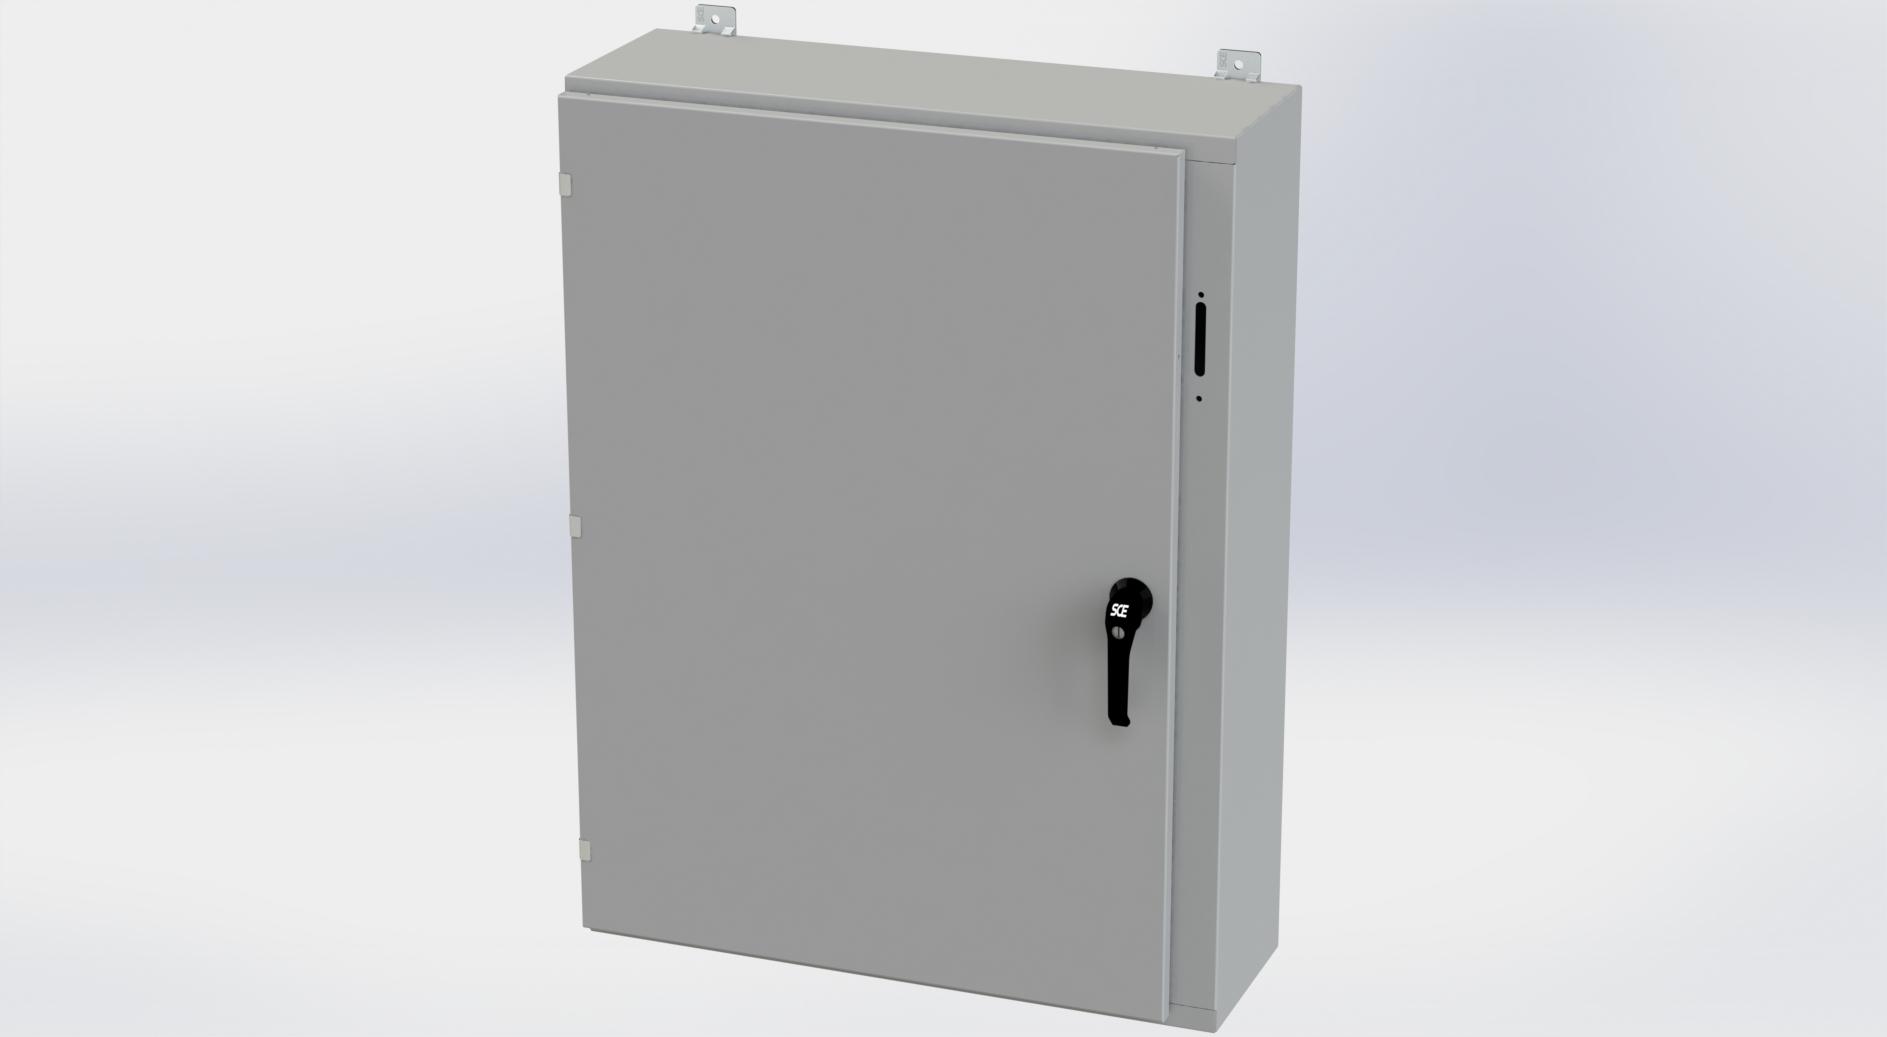 Saginaw Control SCE-42SA3210LPPL Obselete Use SCE-42XEL3110LP, Height:42.00", Width:31.38", Depth:10.00", ANSI-61 gray powder coating inside and out. Optional sub-panels are powder coated white.